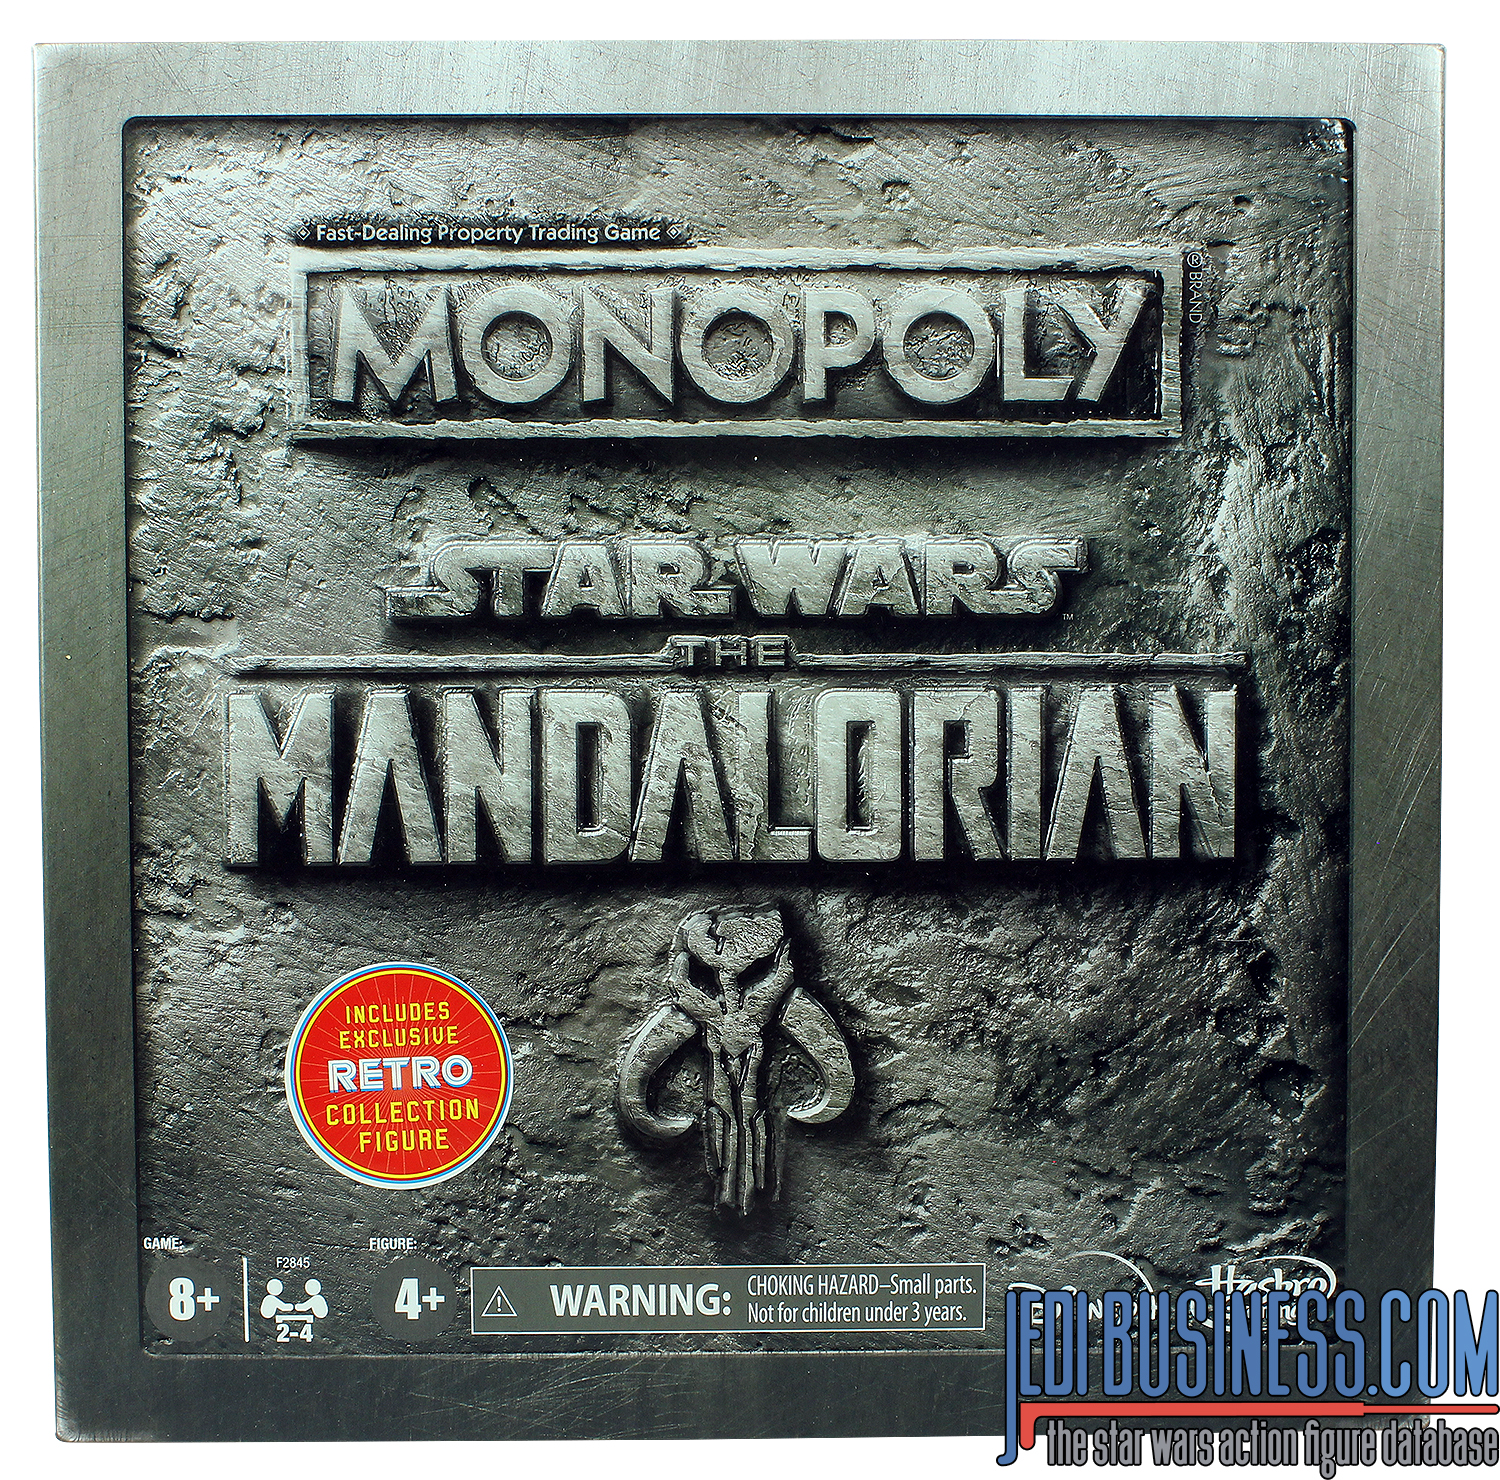 Stormtrooper With Mandalorian Monopoly Boardgame